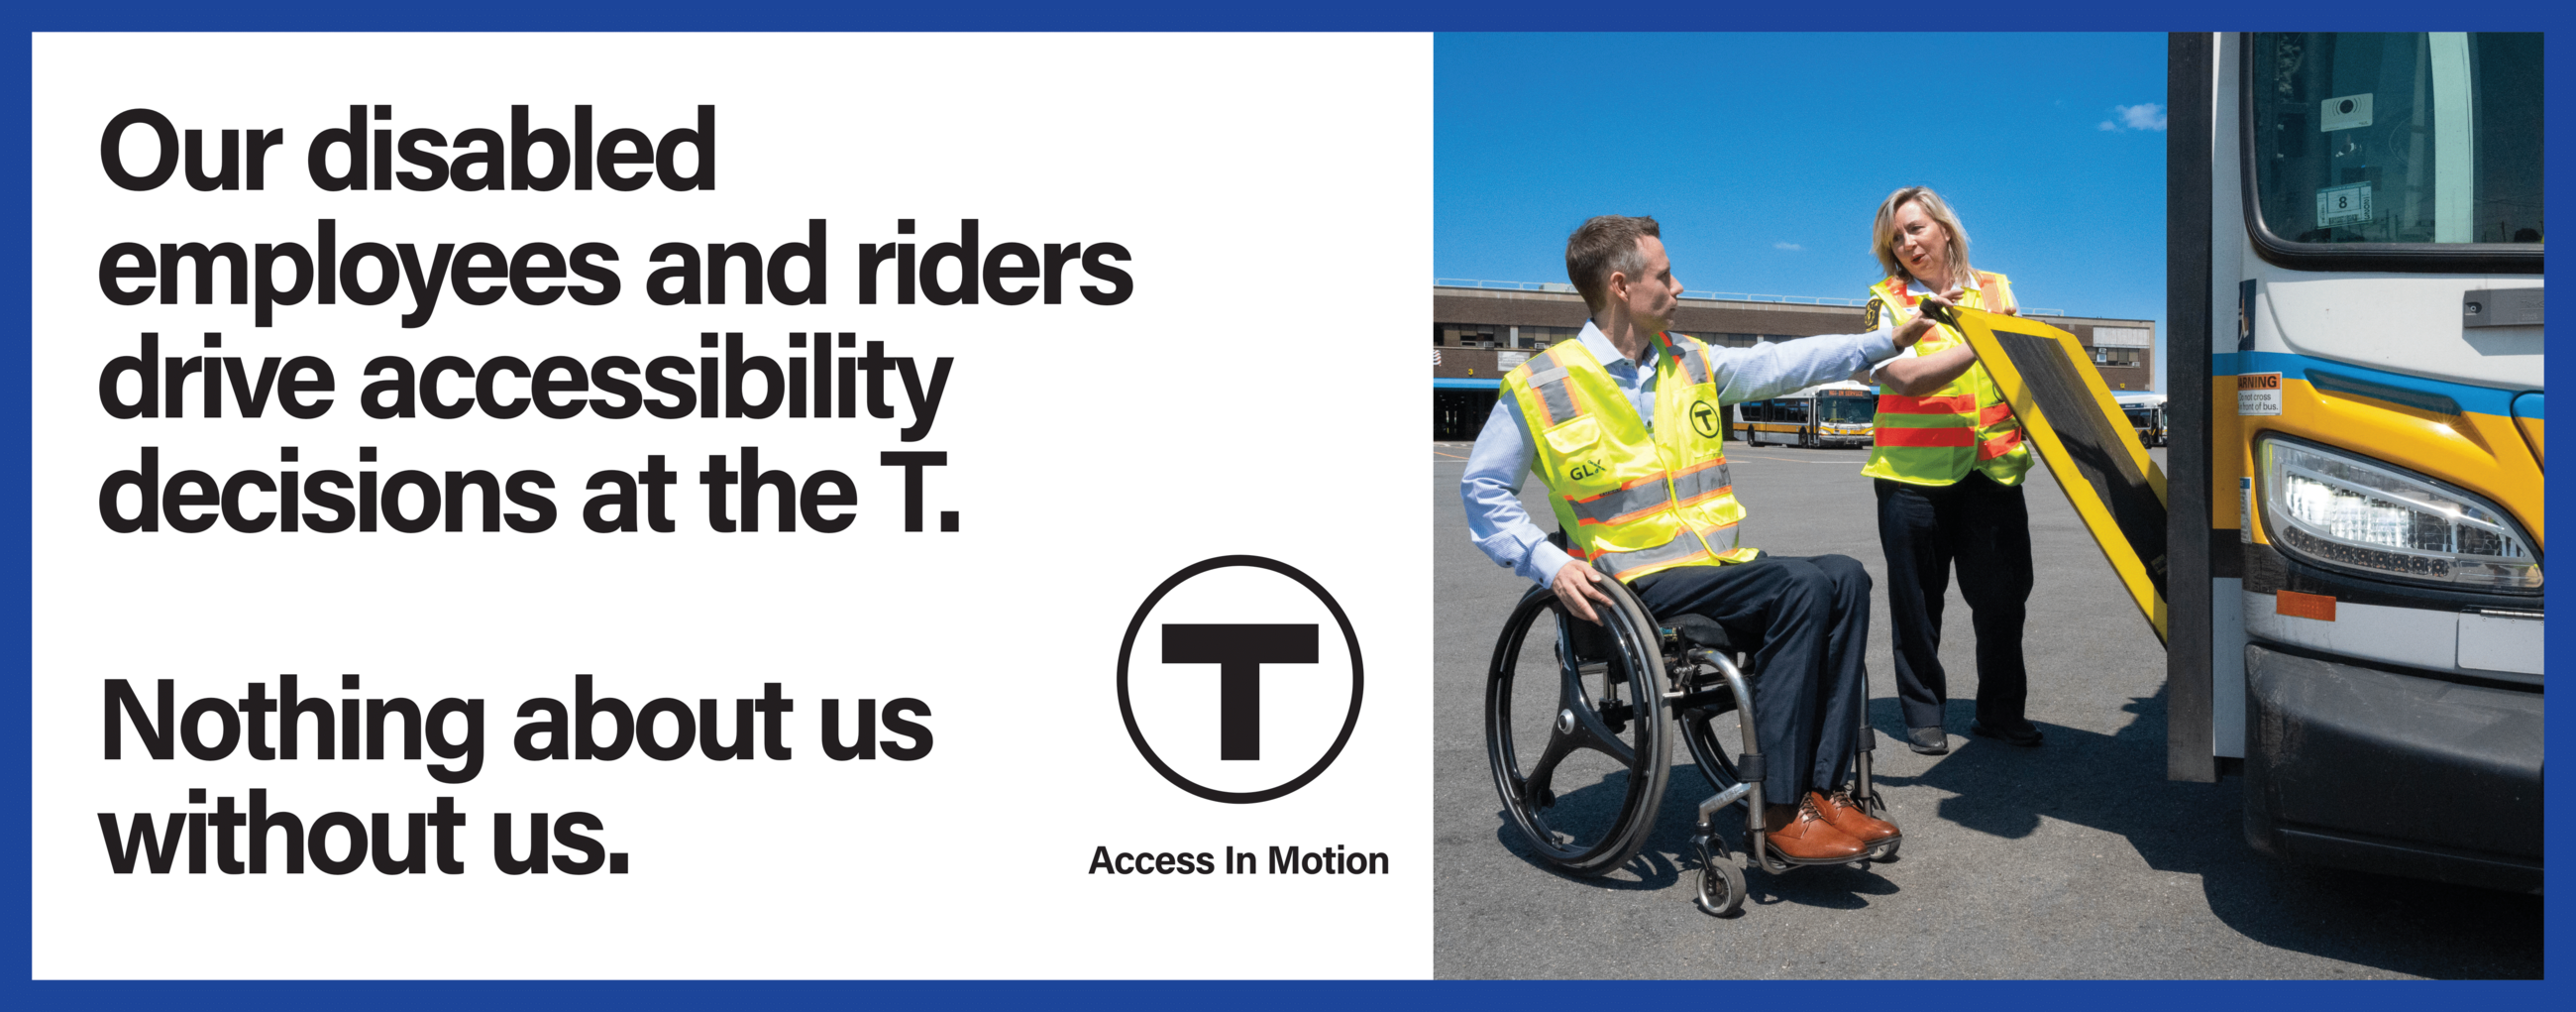 An MBTA employee, who is a white man using a manual wheelchair, holds the edge of a partially lowered bus ramp as he speaks with a colleague, an ambulatory white woman. Both wear yellow safety vests. Text reads: “Our disabled employees and riders drive accessibility decisions at the T. Nothing about us without us.” followed by the T logo and the “Access In Motion” tagline.